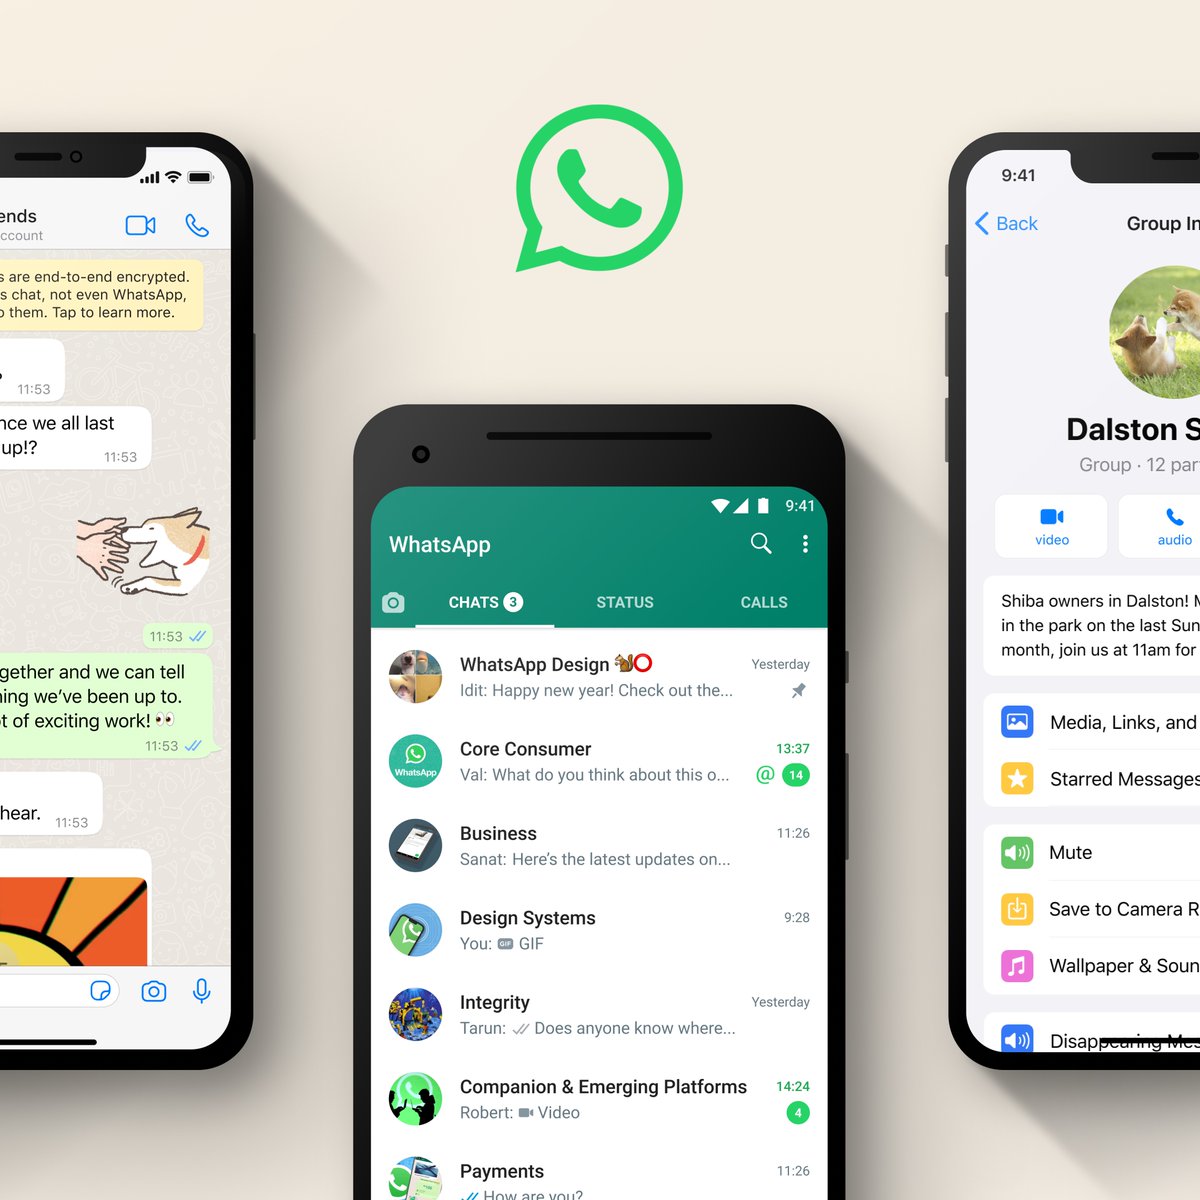 Three design leaders at @WhatsApp discuss designing with empathy, creating intuitive design solutions and the ways the app is evolving for the future. Read the story: design.facebook.com/stories/design… #ProductDesign